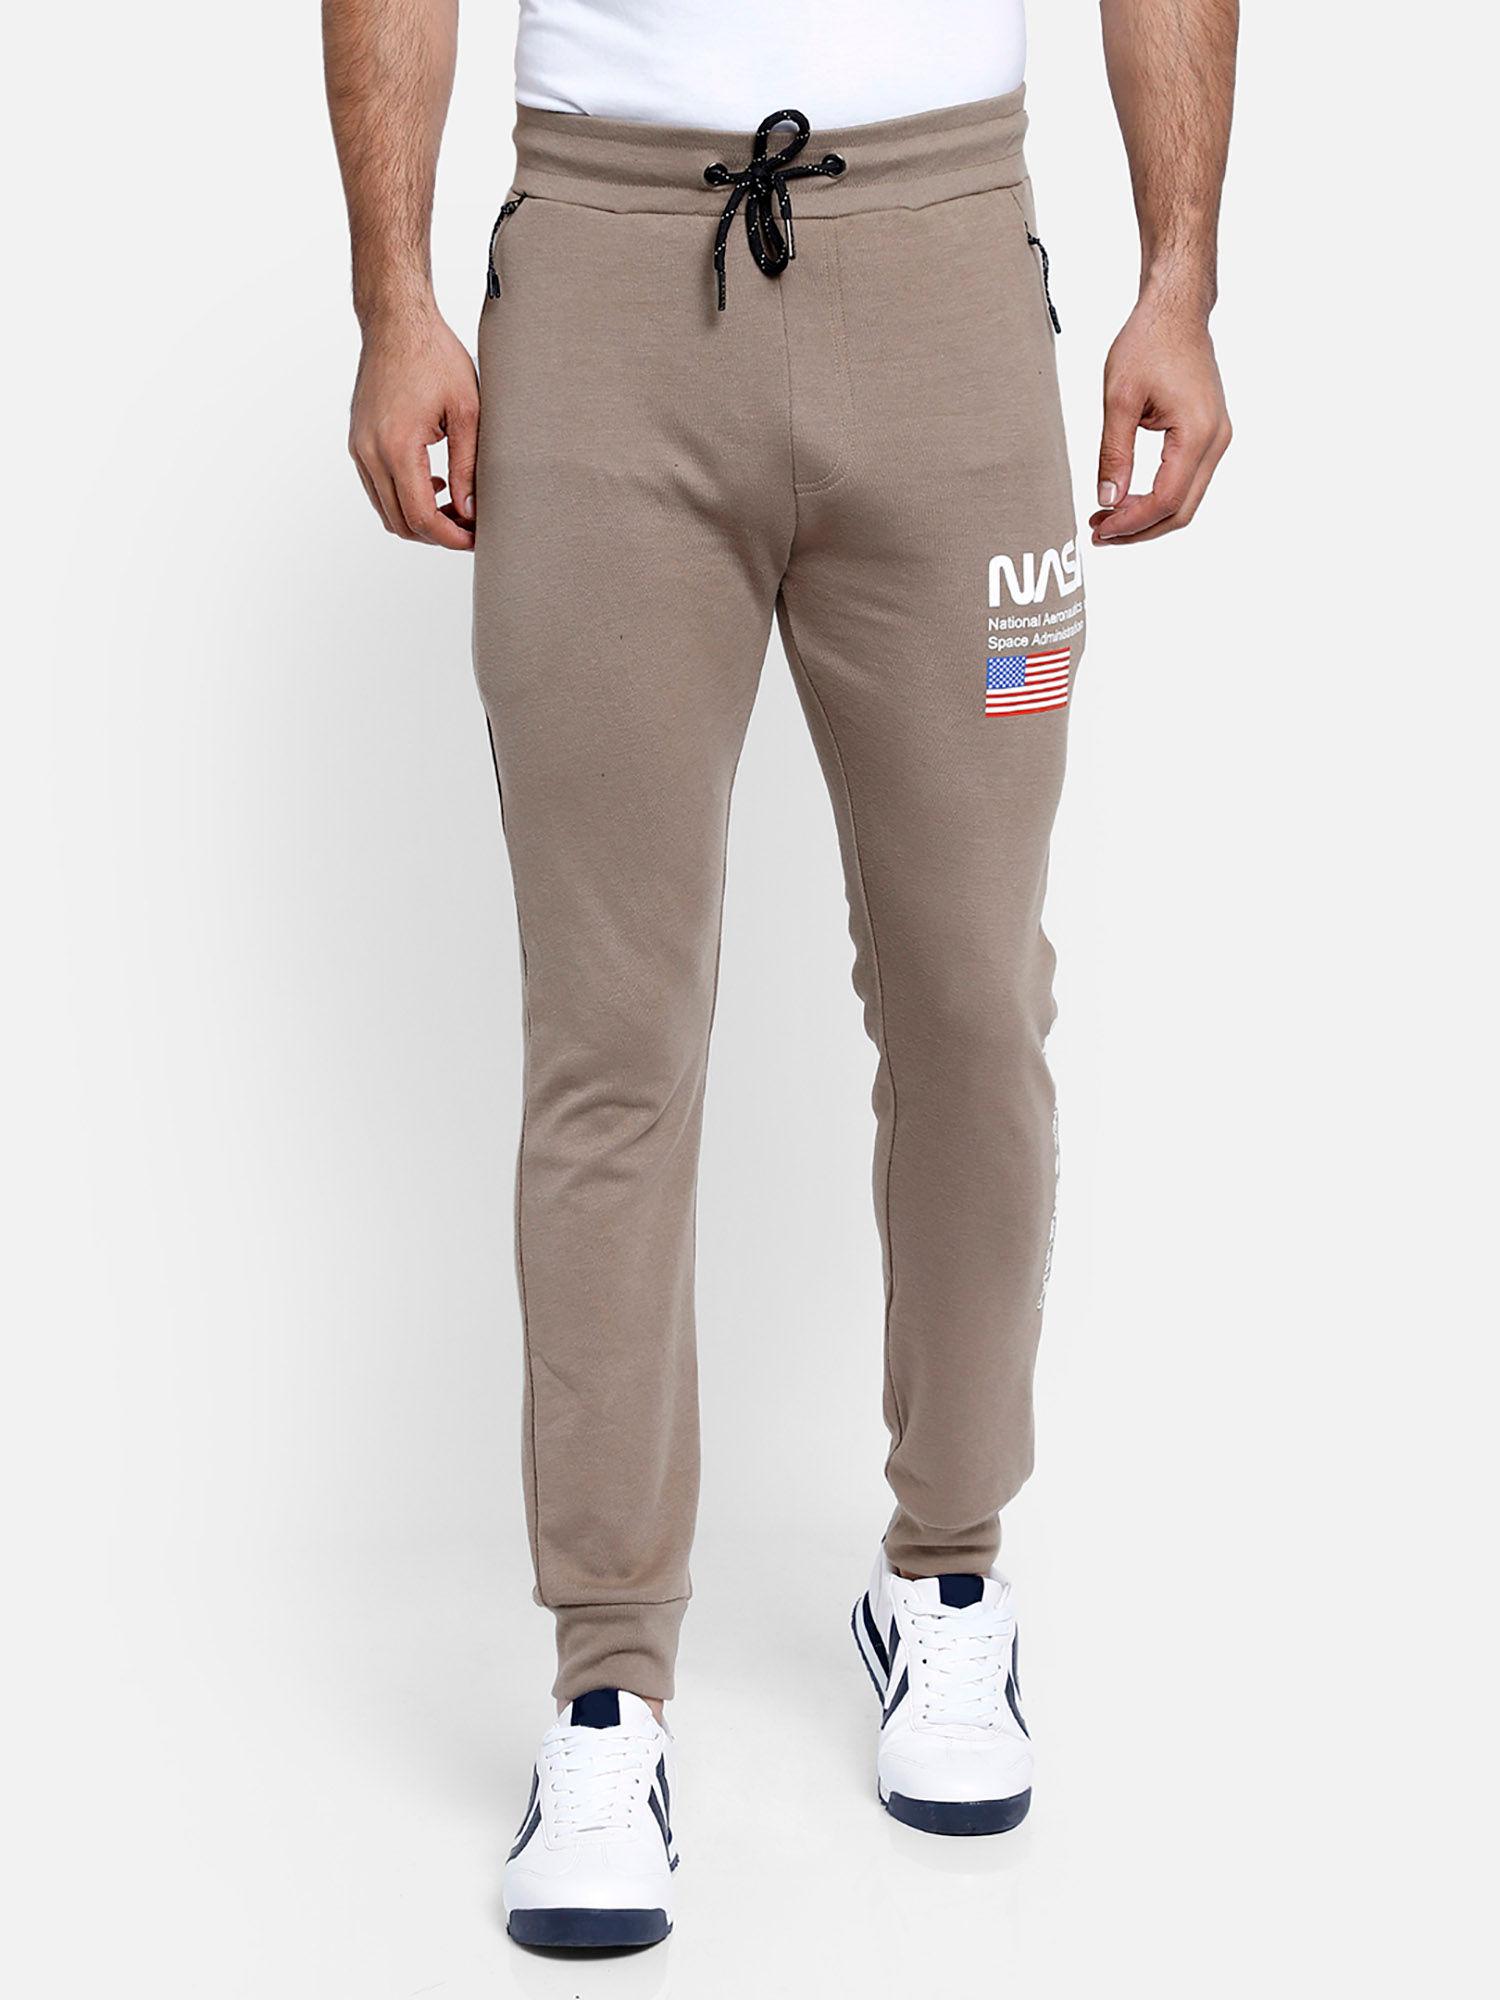 nasa featured beige joggers for men